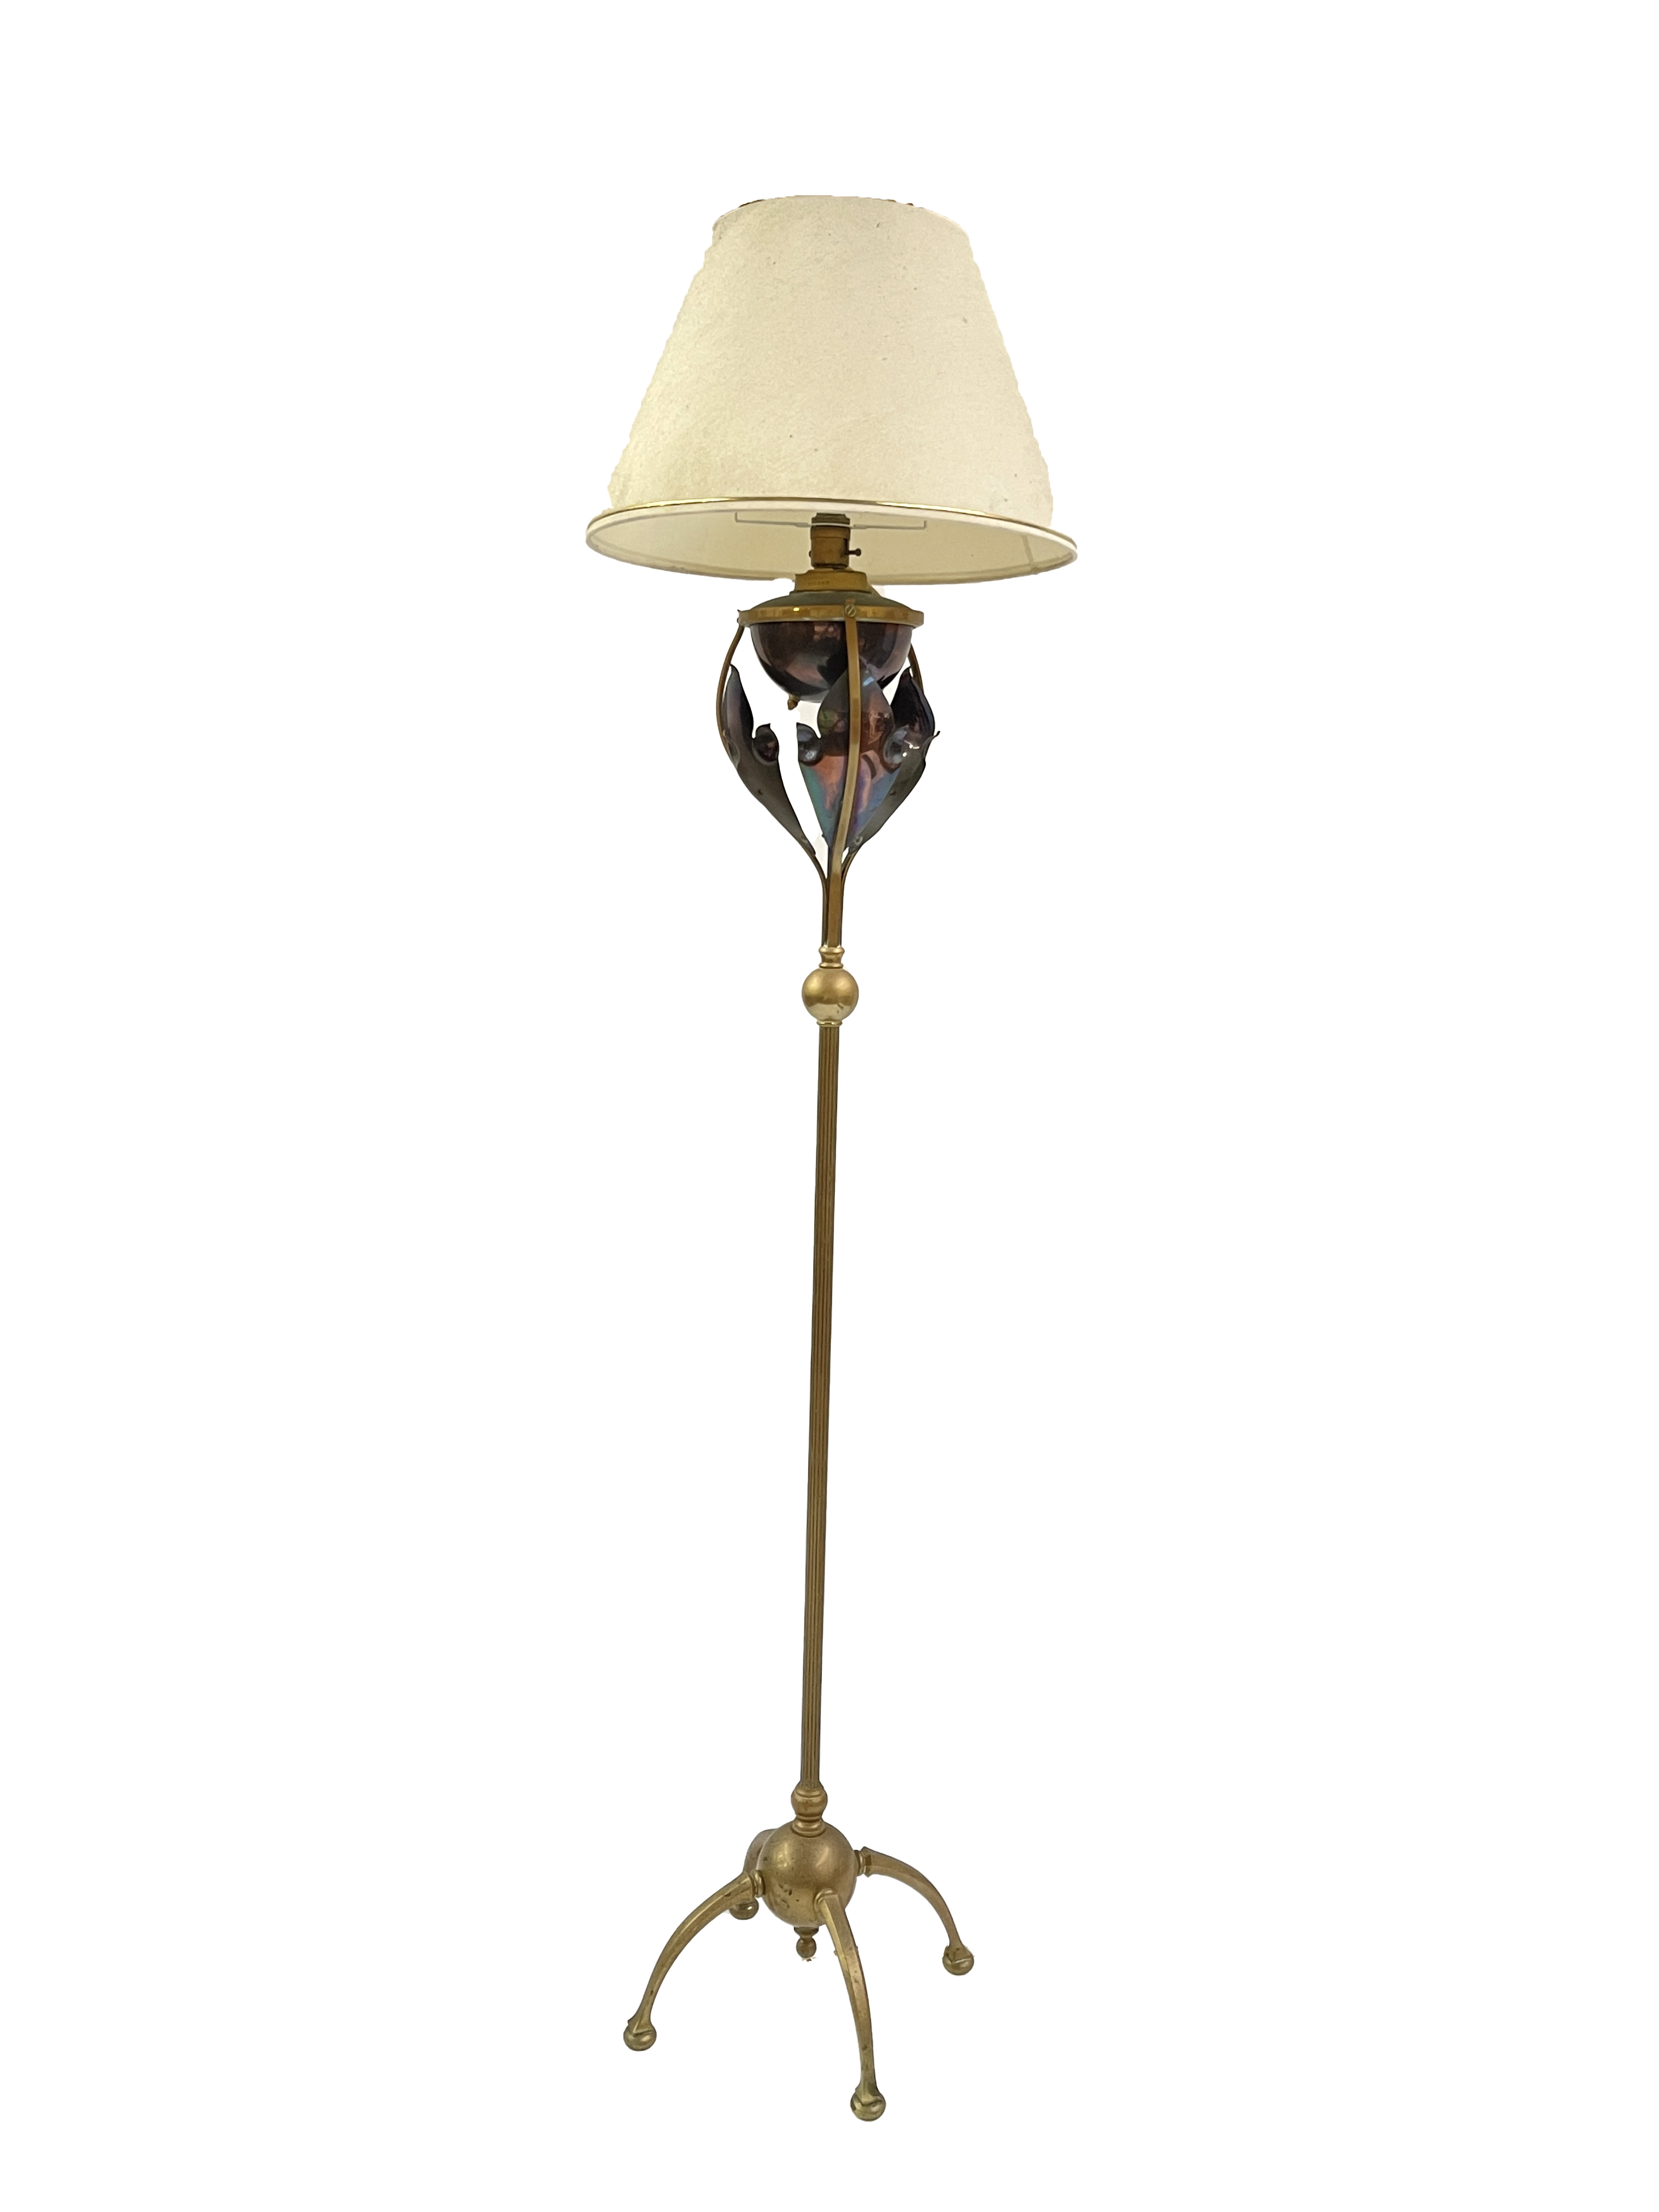 W A S Benson, an Arts and Crafts copper and brass floor standing lamp - Image 4 of 5